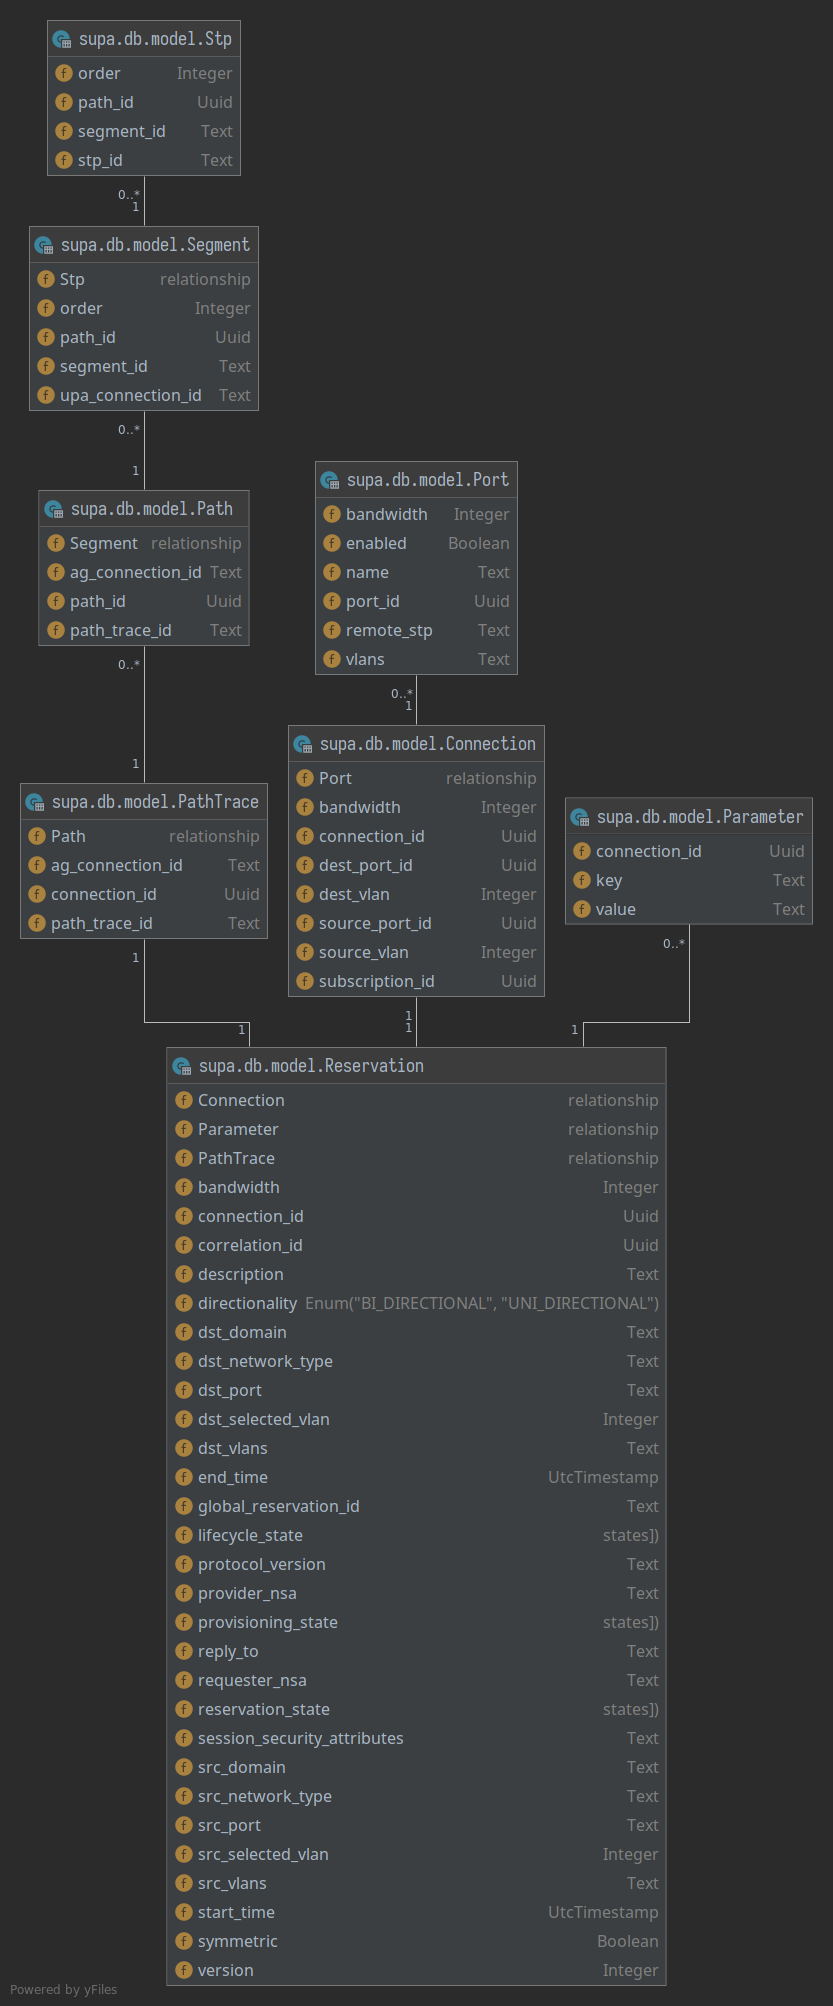 _images/sqlalchemy_model_dependency_diagram.png